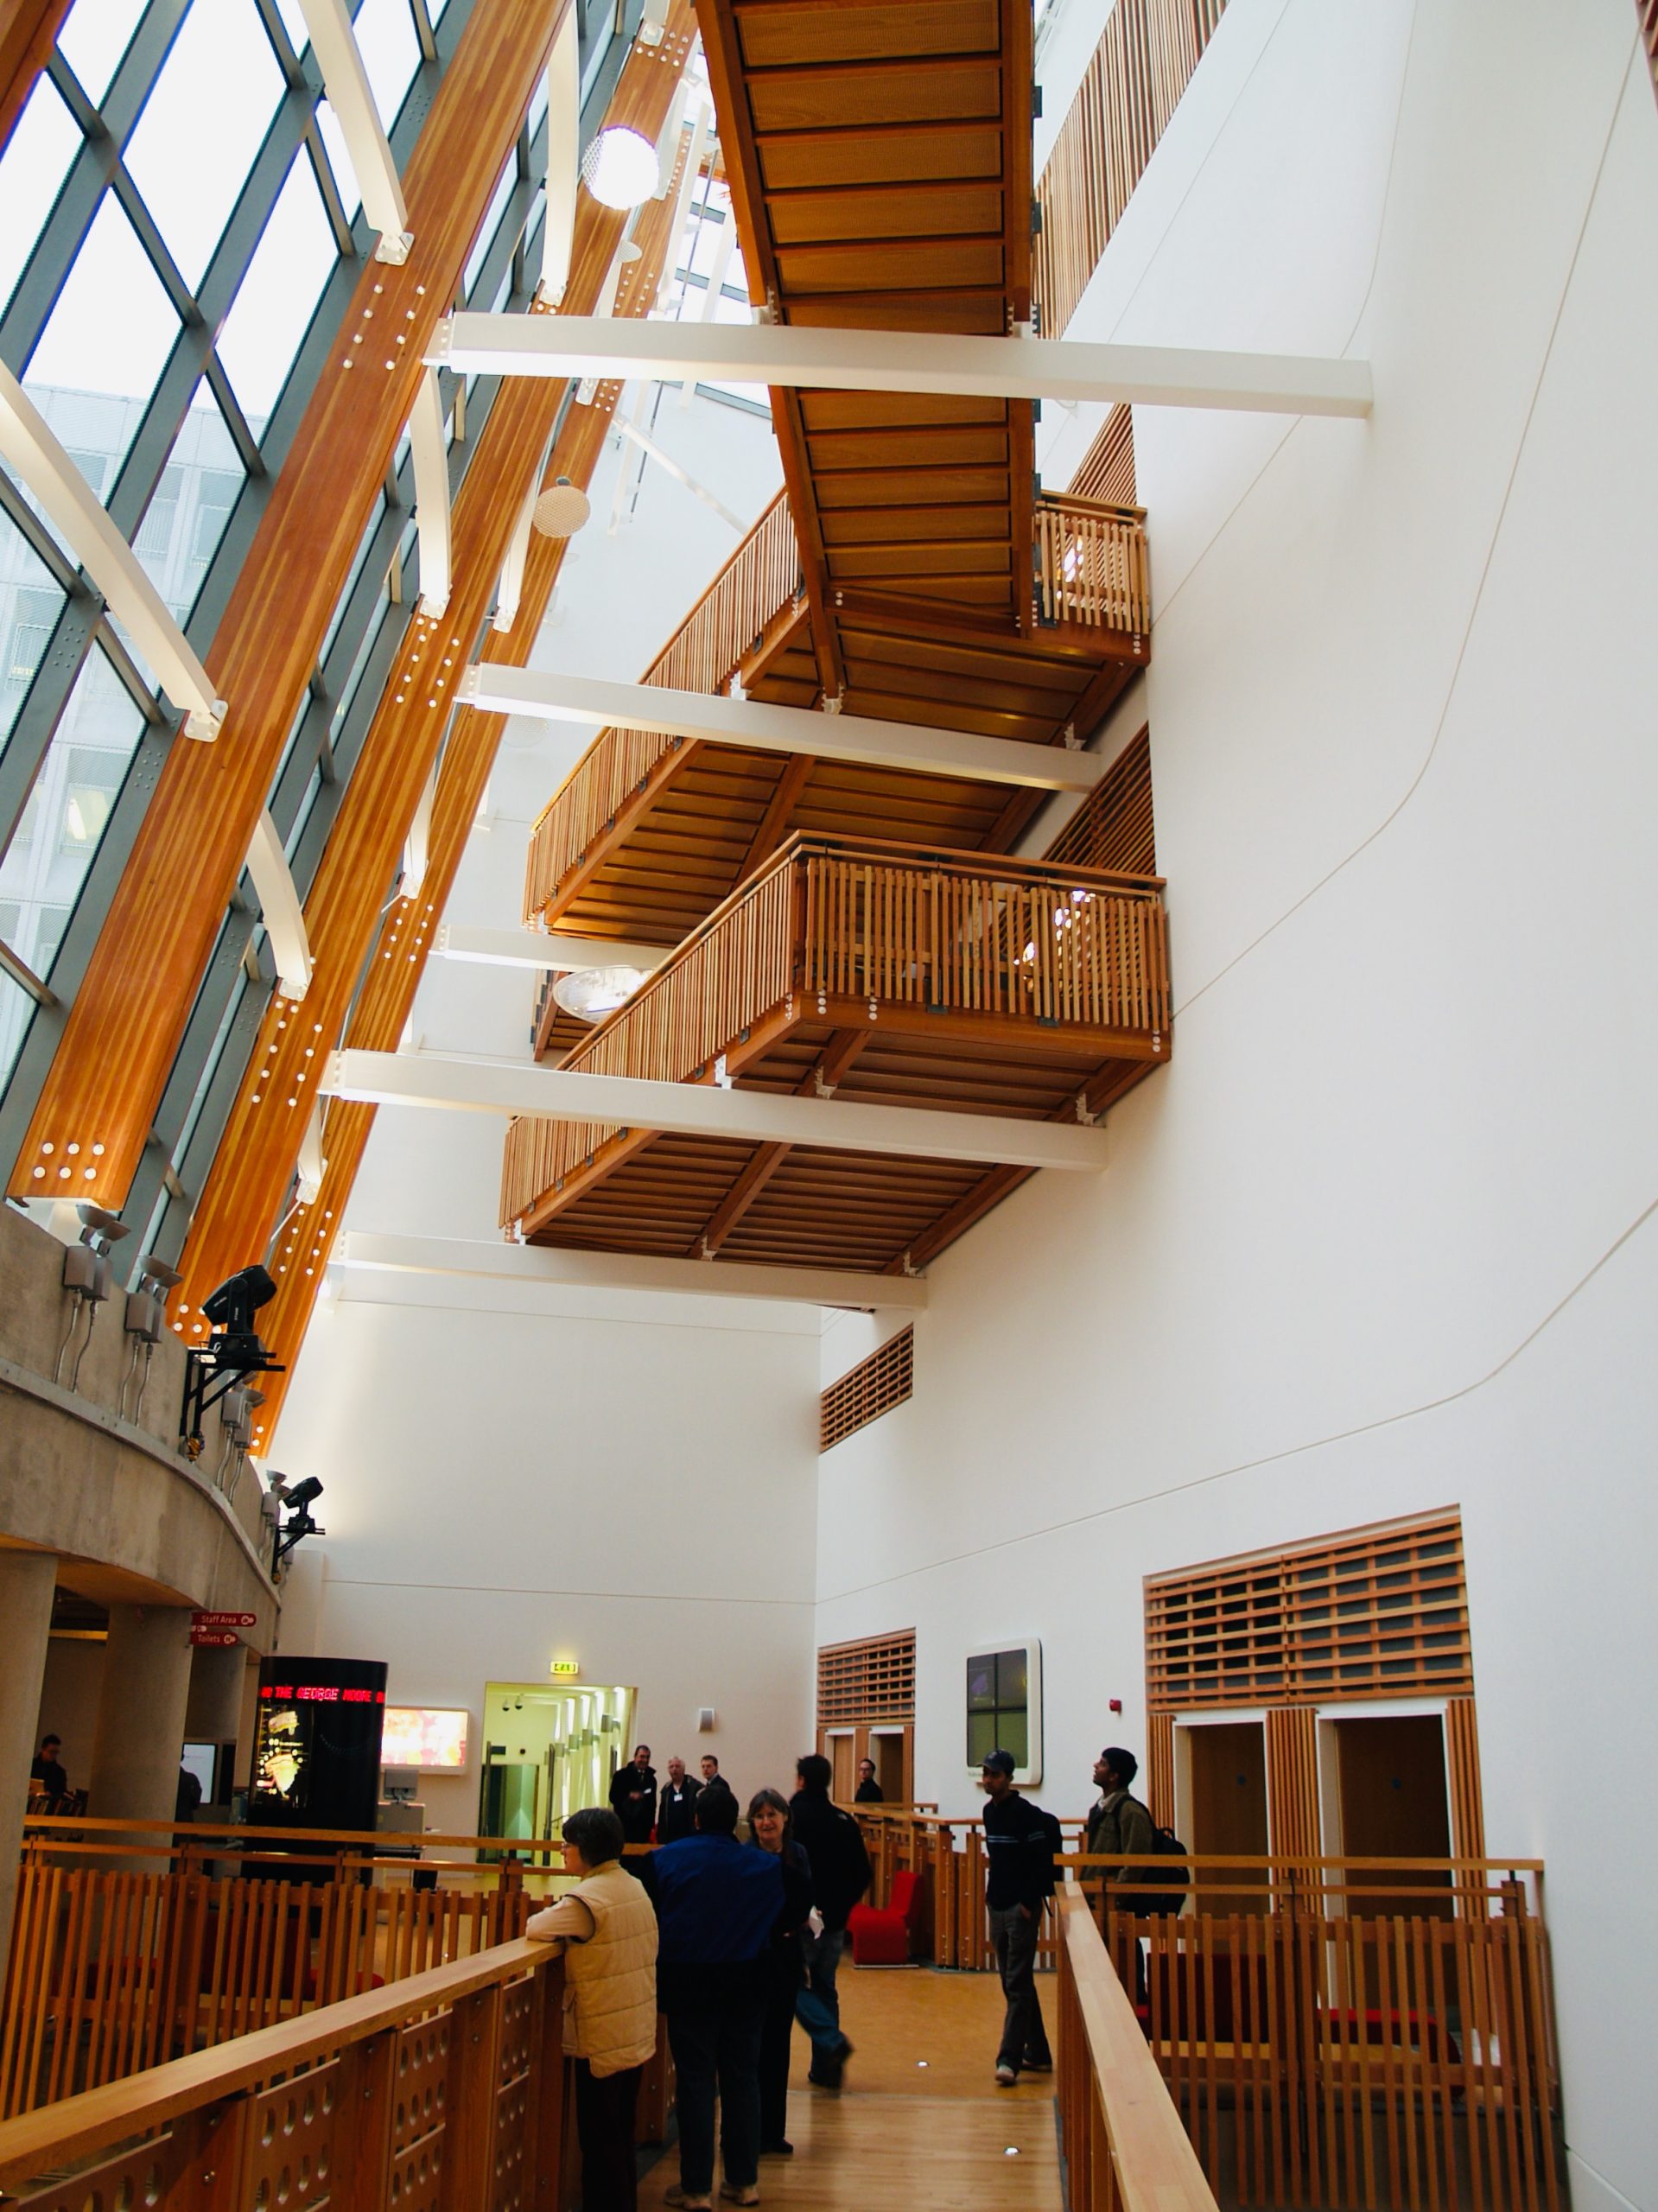 View through the atrium of the Saltire Centre from the first floor showing balcony and upper level walkway